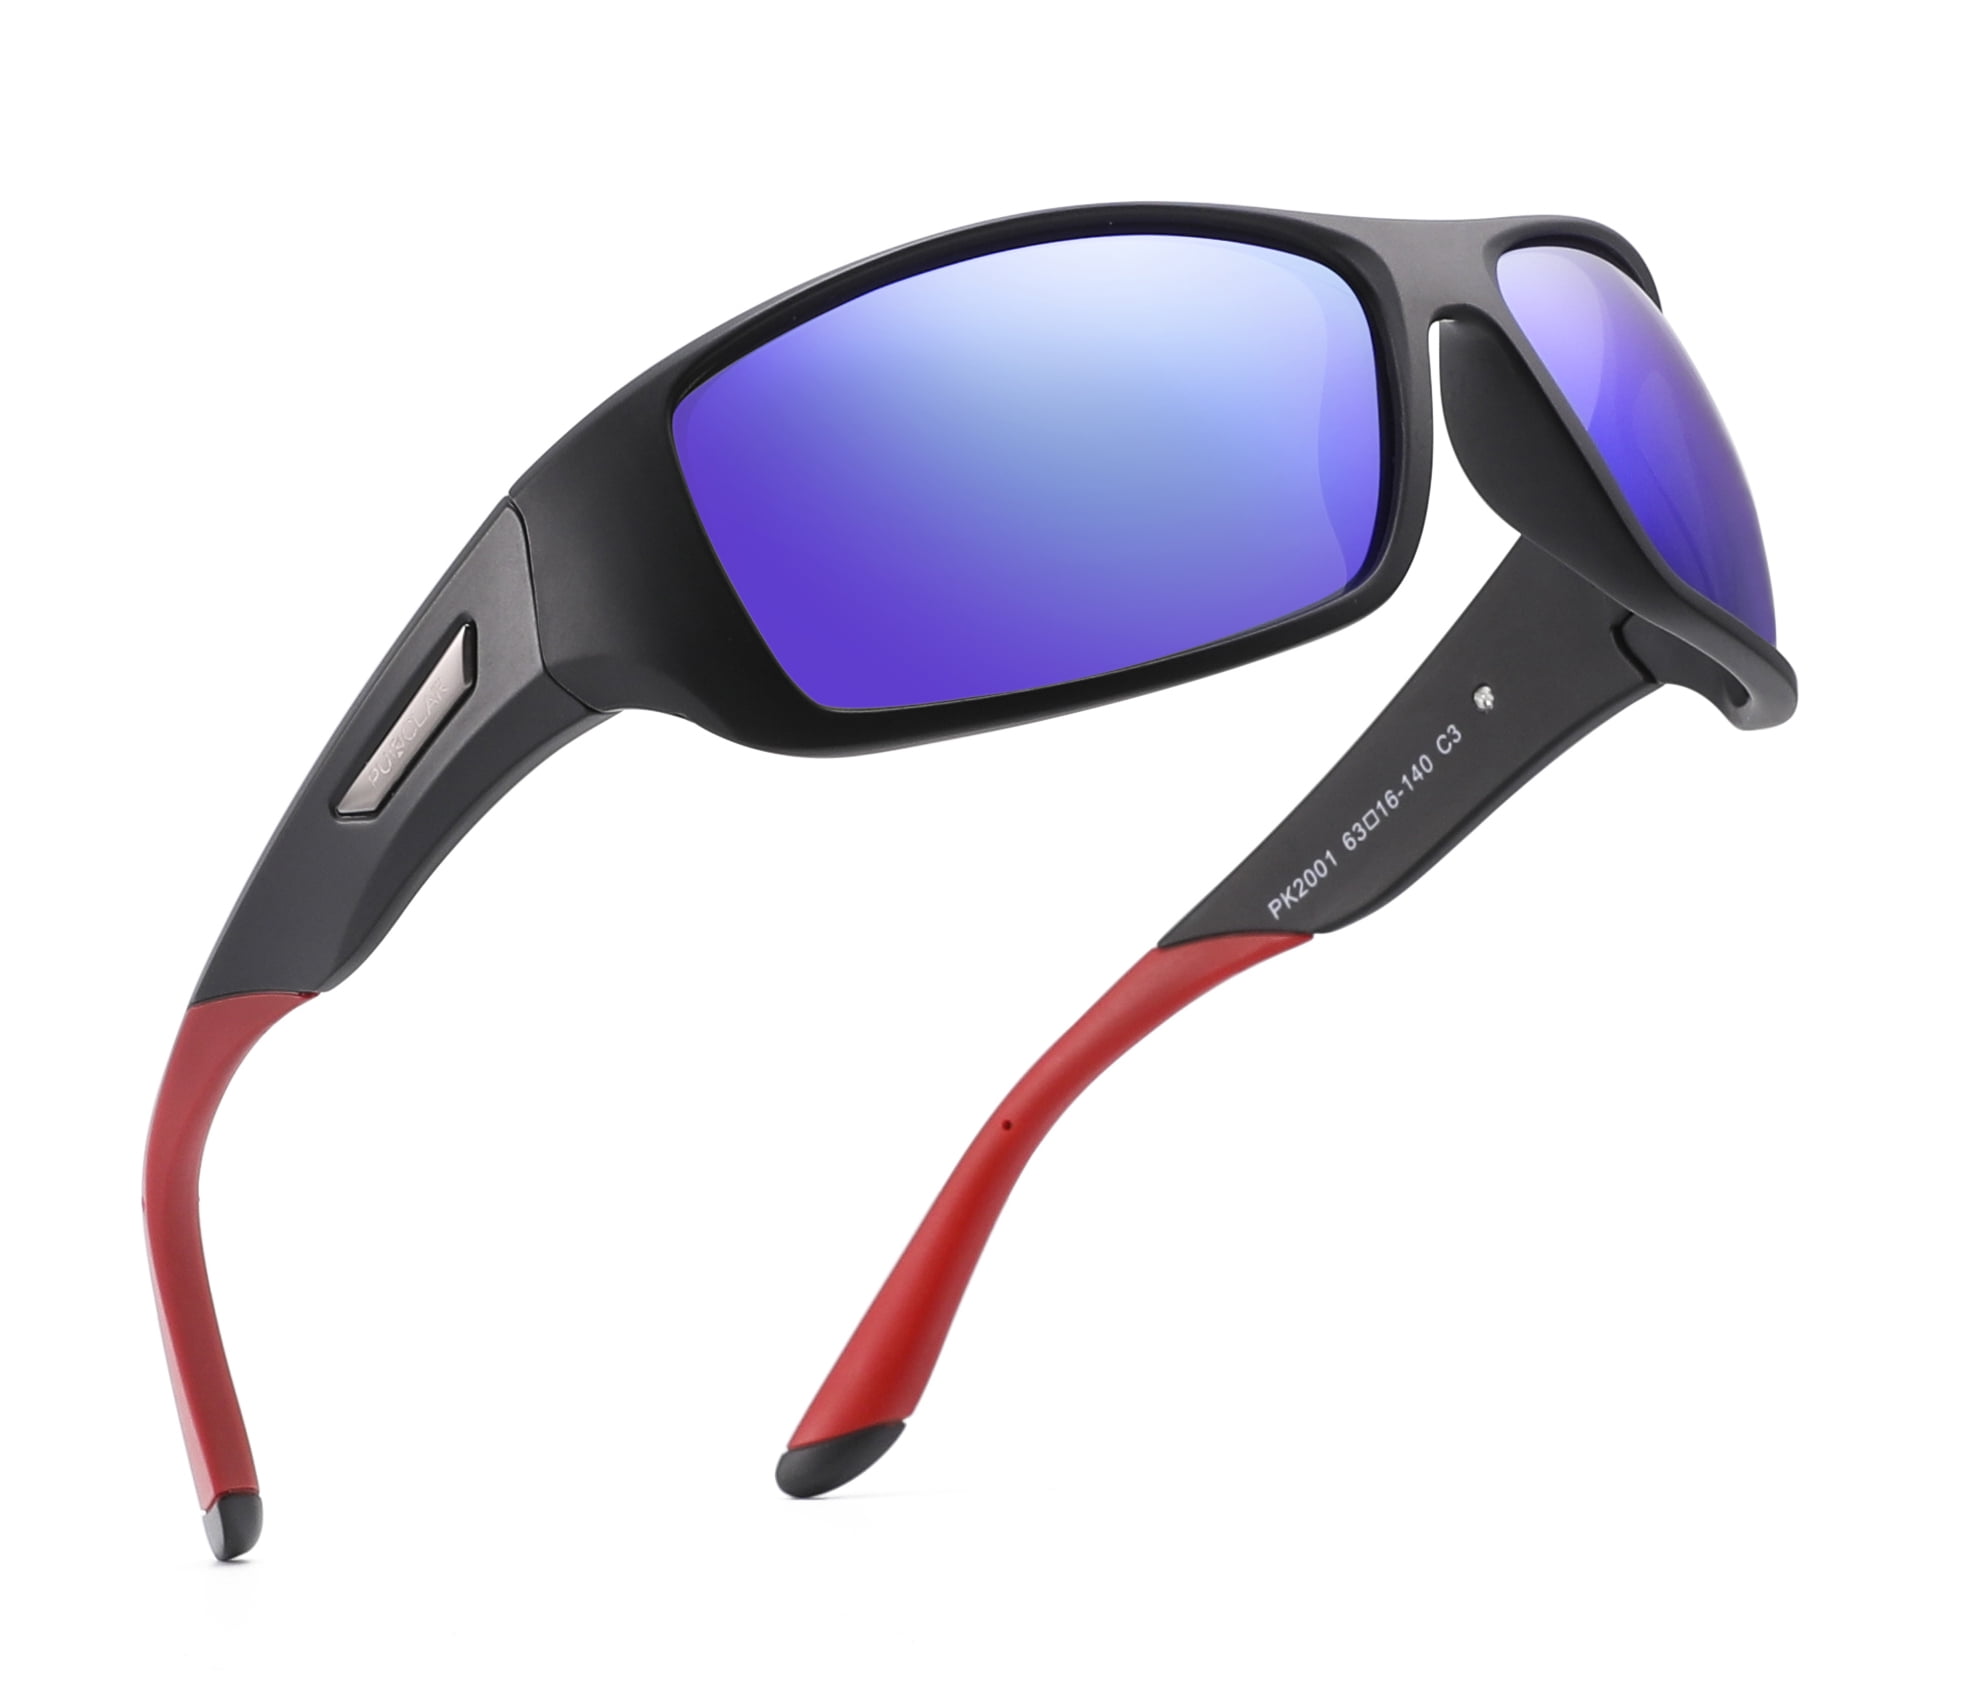 PUKCLAR Polarized Sports Sunglasses for Men Women Driving Sunglasses Cycling  Running Fishing Golf Goggles Unbreakable Frame 